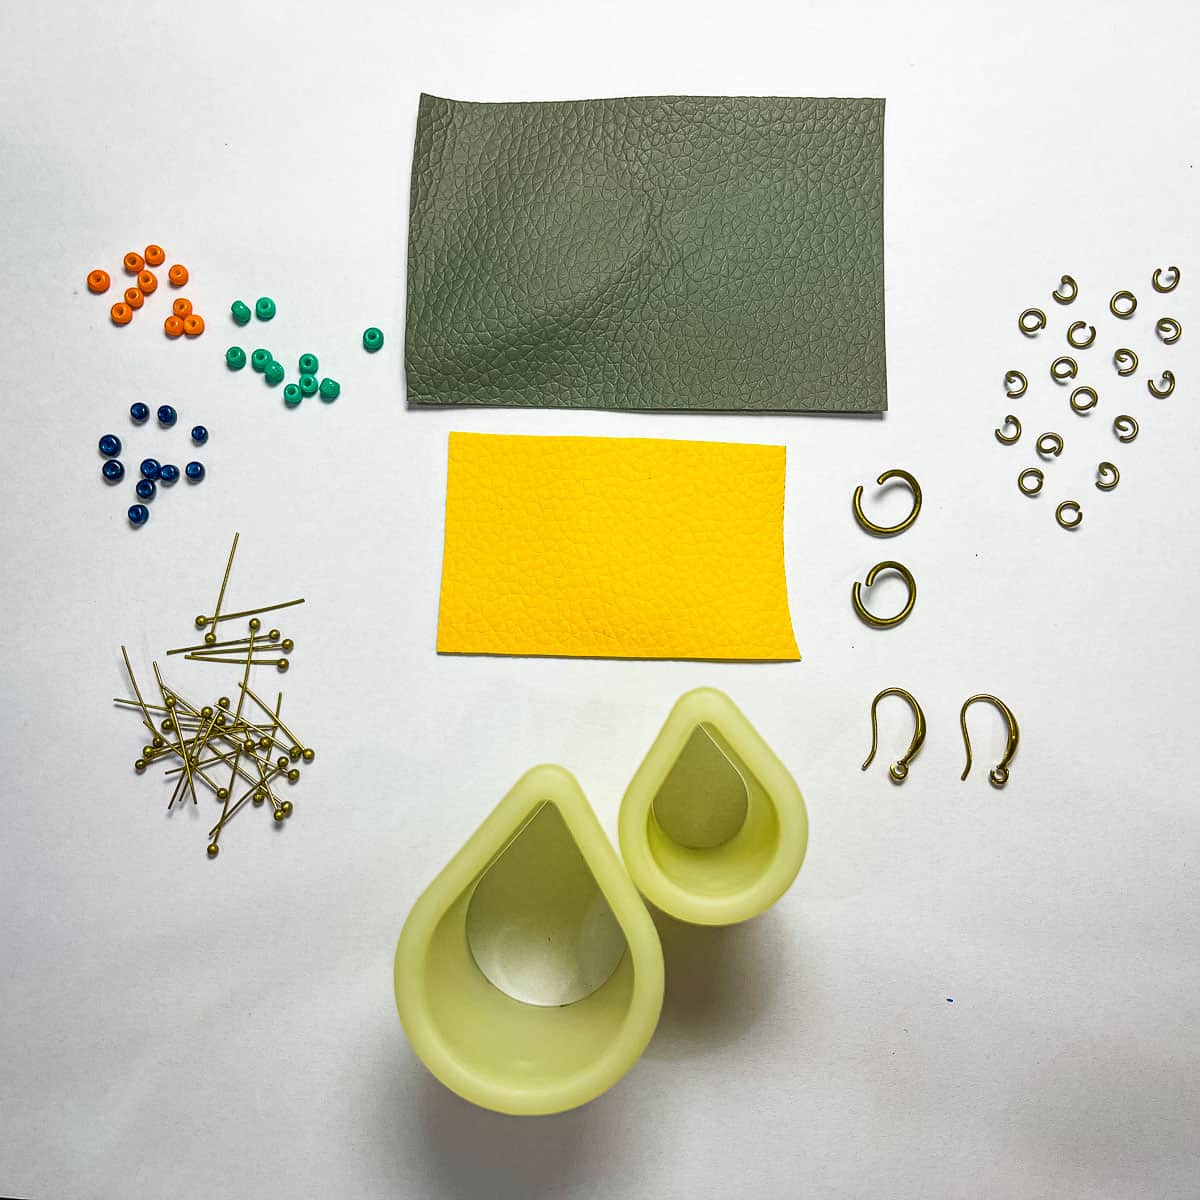 Supplies to make faux leather earrings.